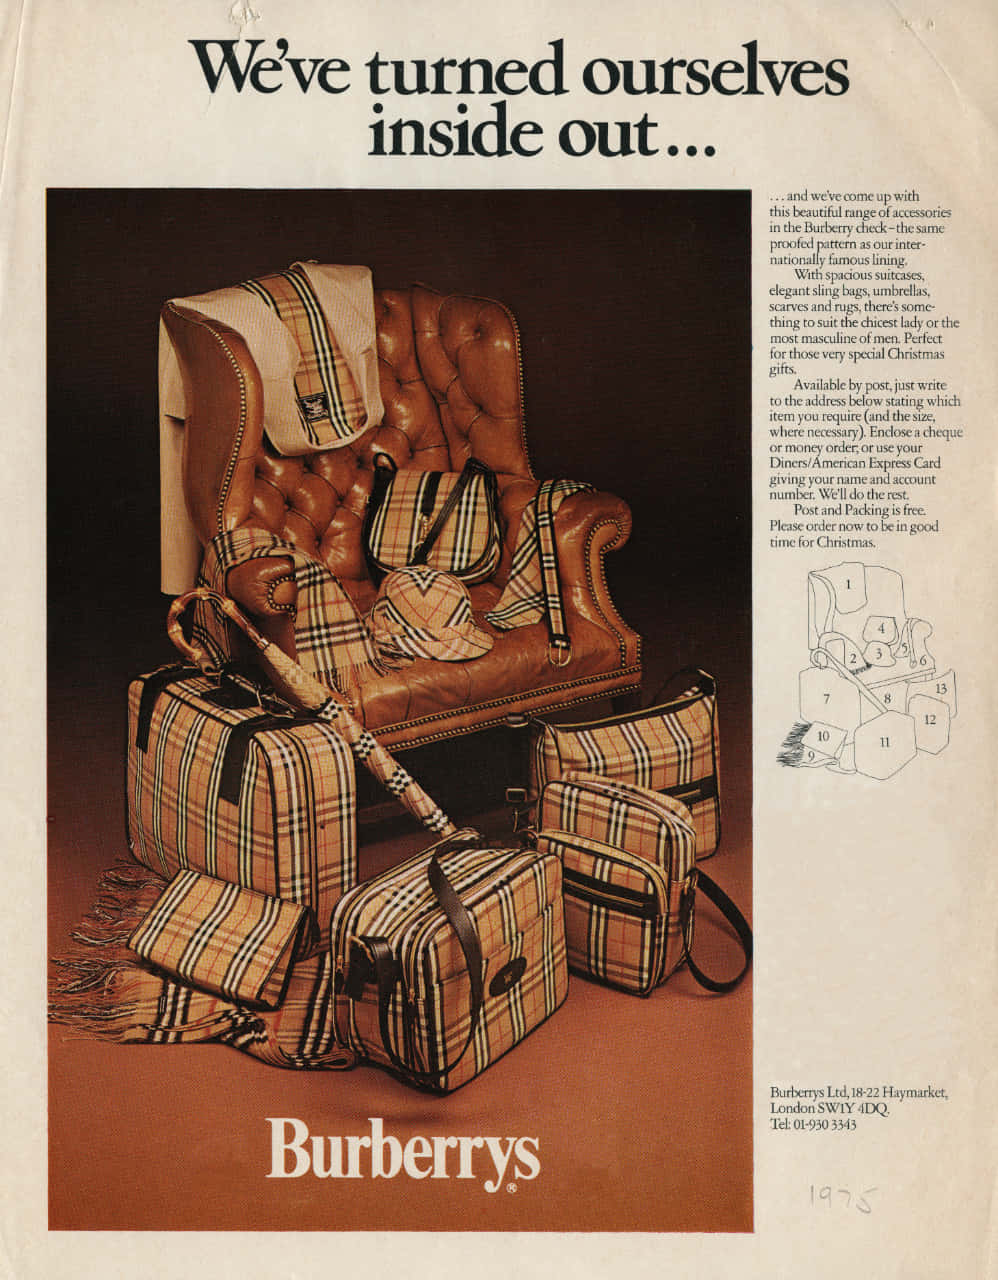 Burberry's Ad From The 1960s